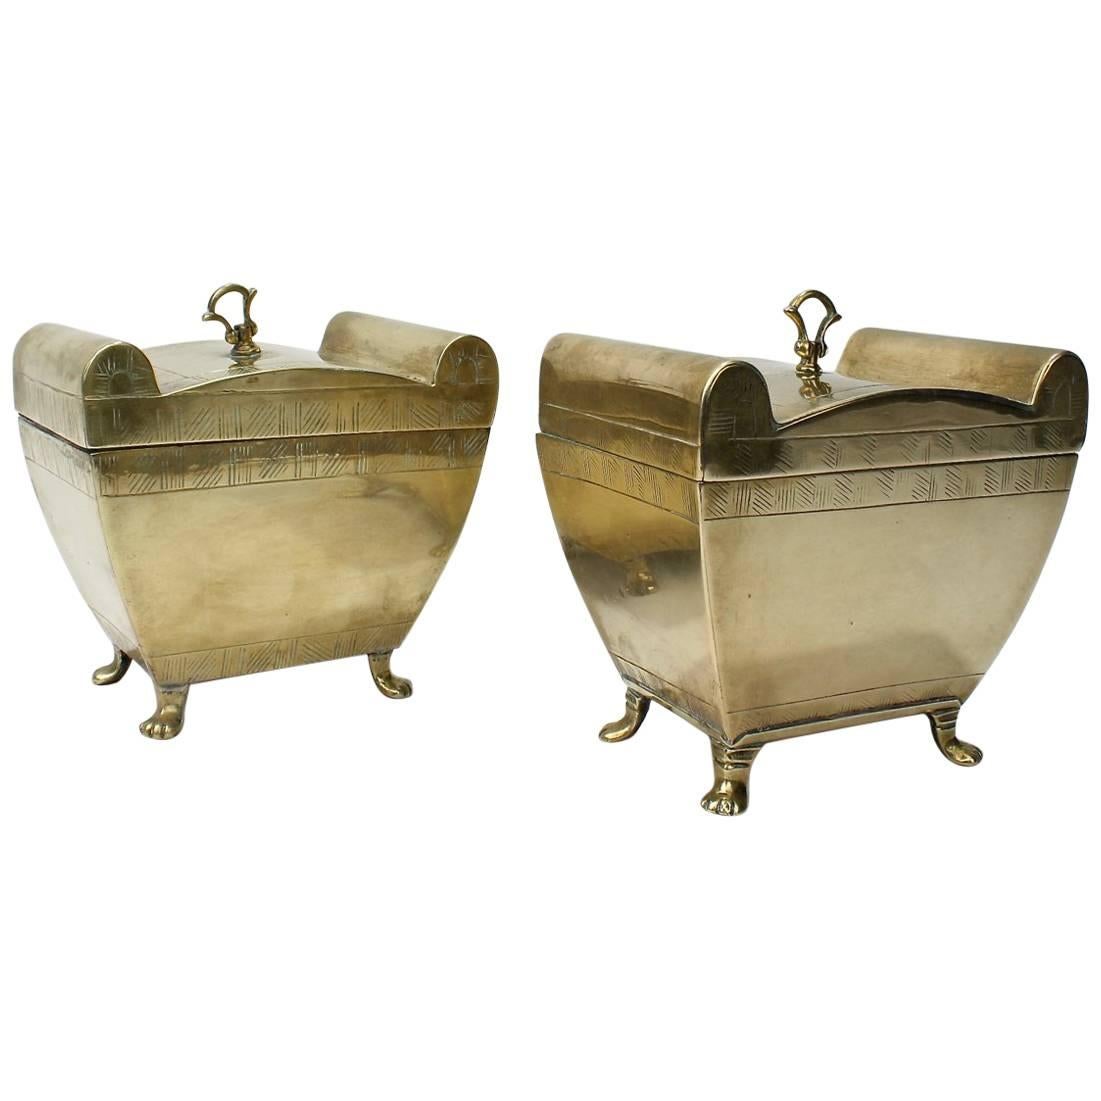 Matched Pair of English Colonial or Anglo-Indian Brass Tea Caddies